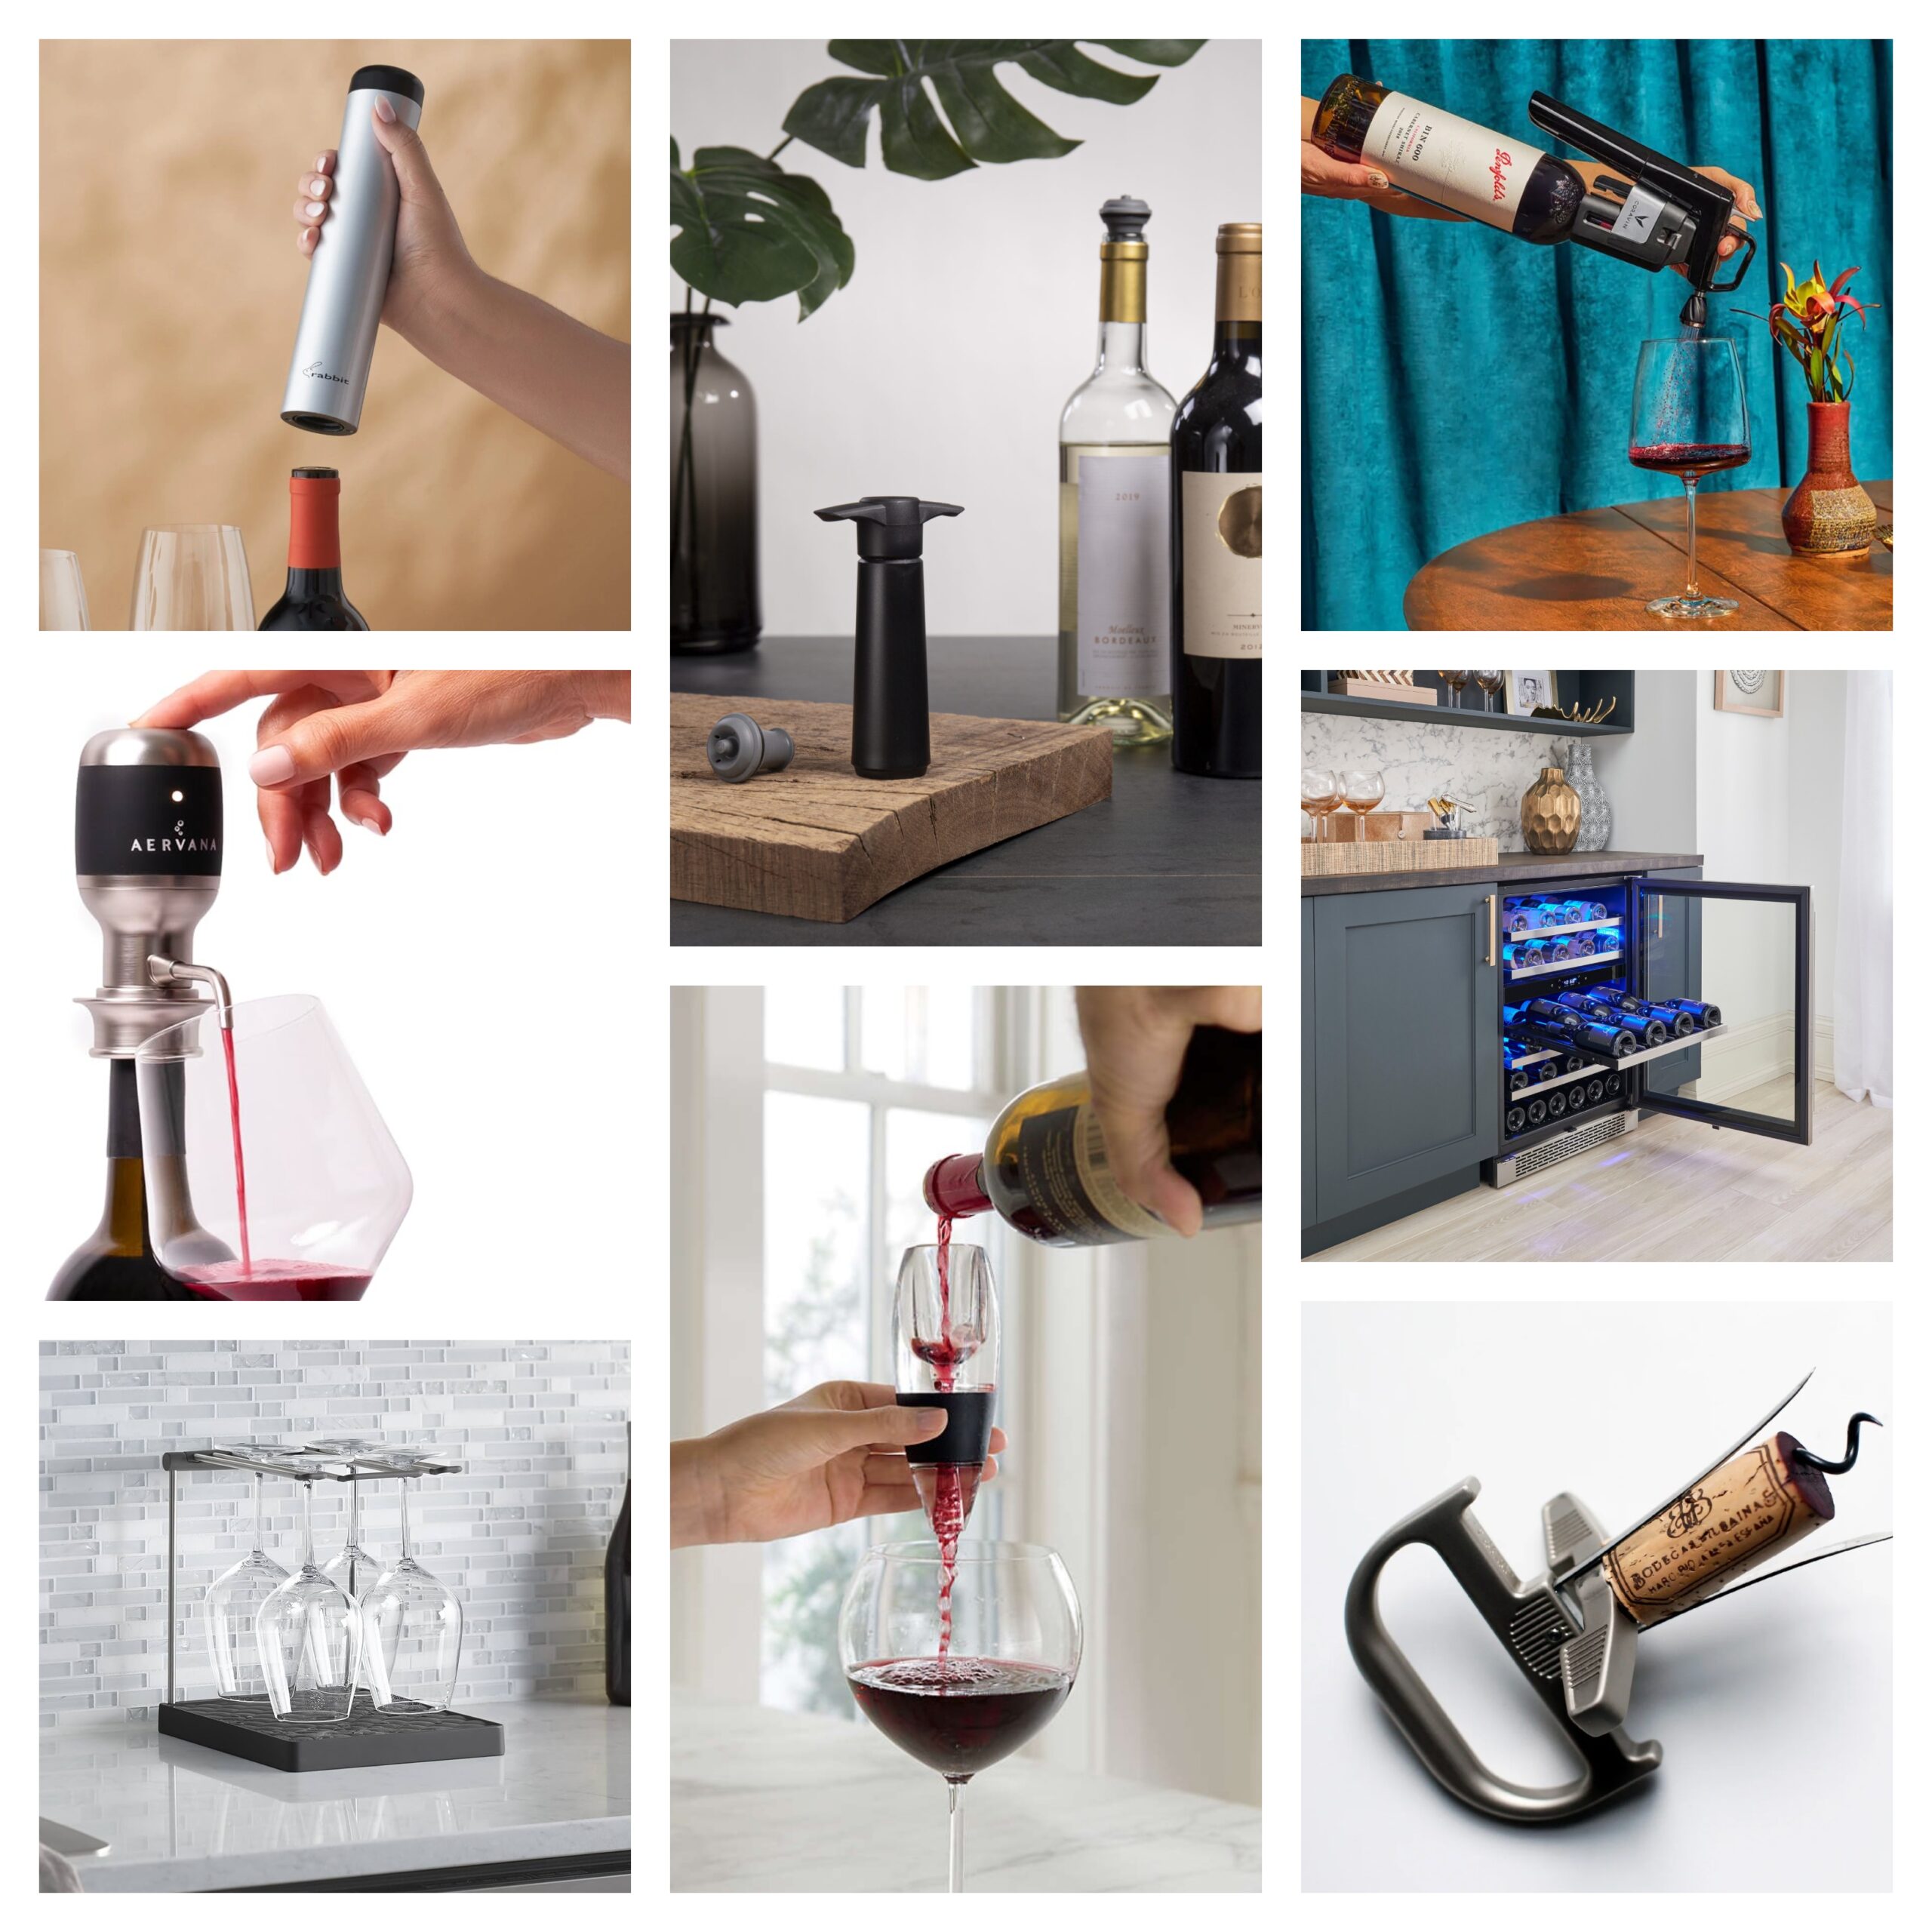 The 10 Best Wedding Gifts for Wine Lovers